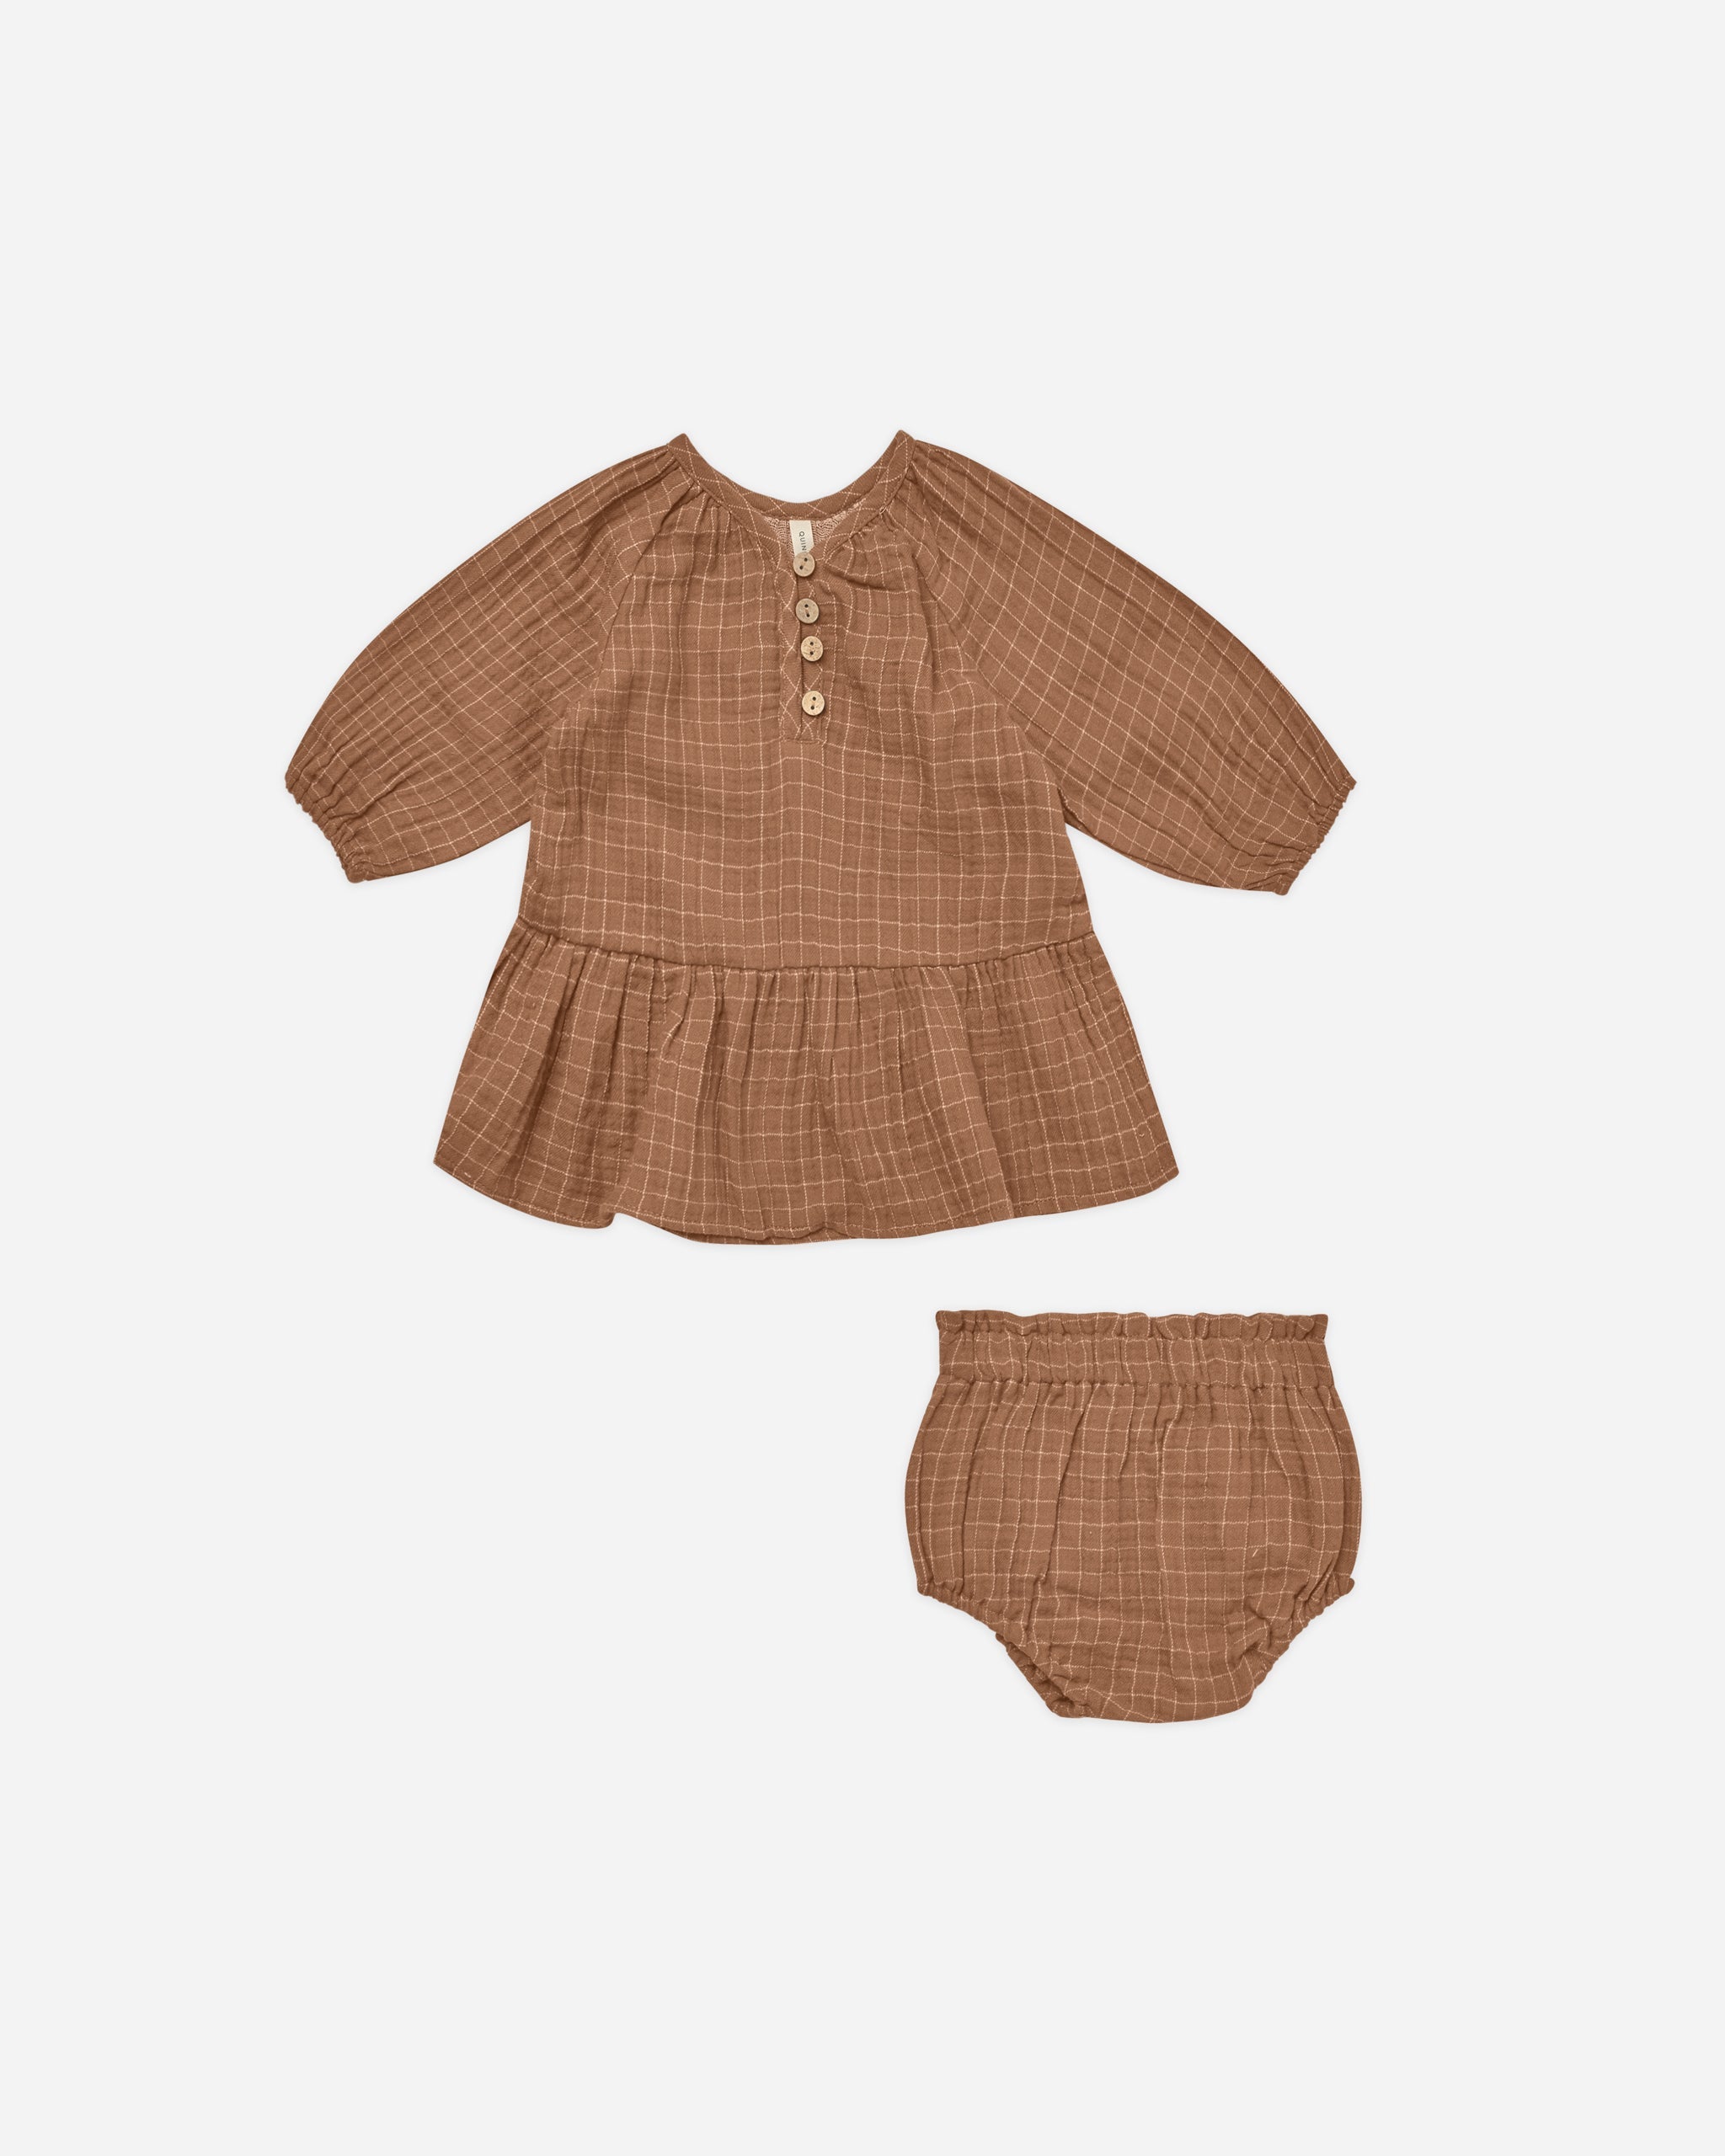 Lany Dress || Cinnamon Grid - Rylee + Cru | Kids Clothes | Trendy Baby Clothes | Modern Infant Outfits |